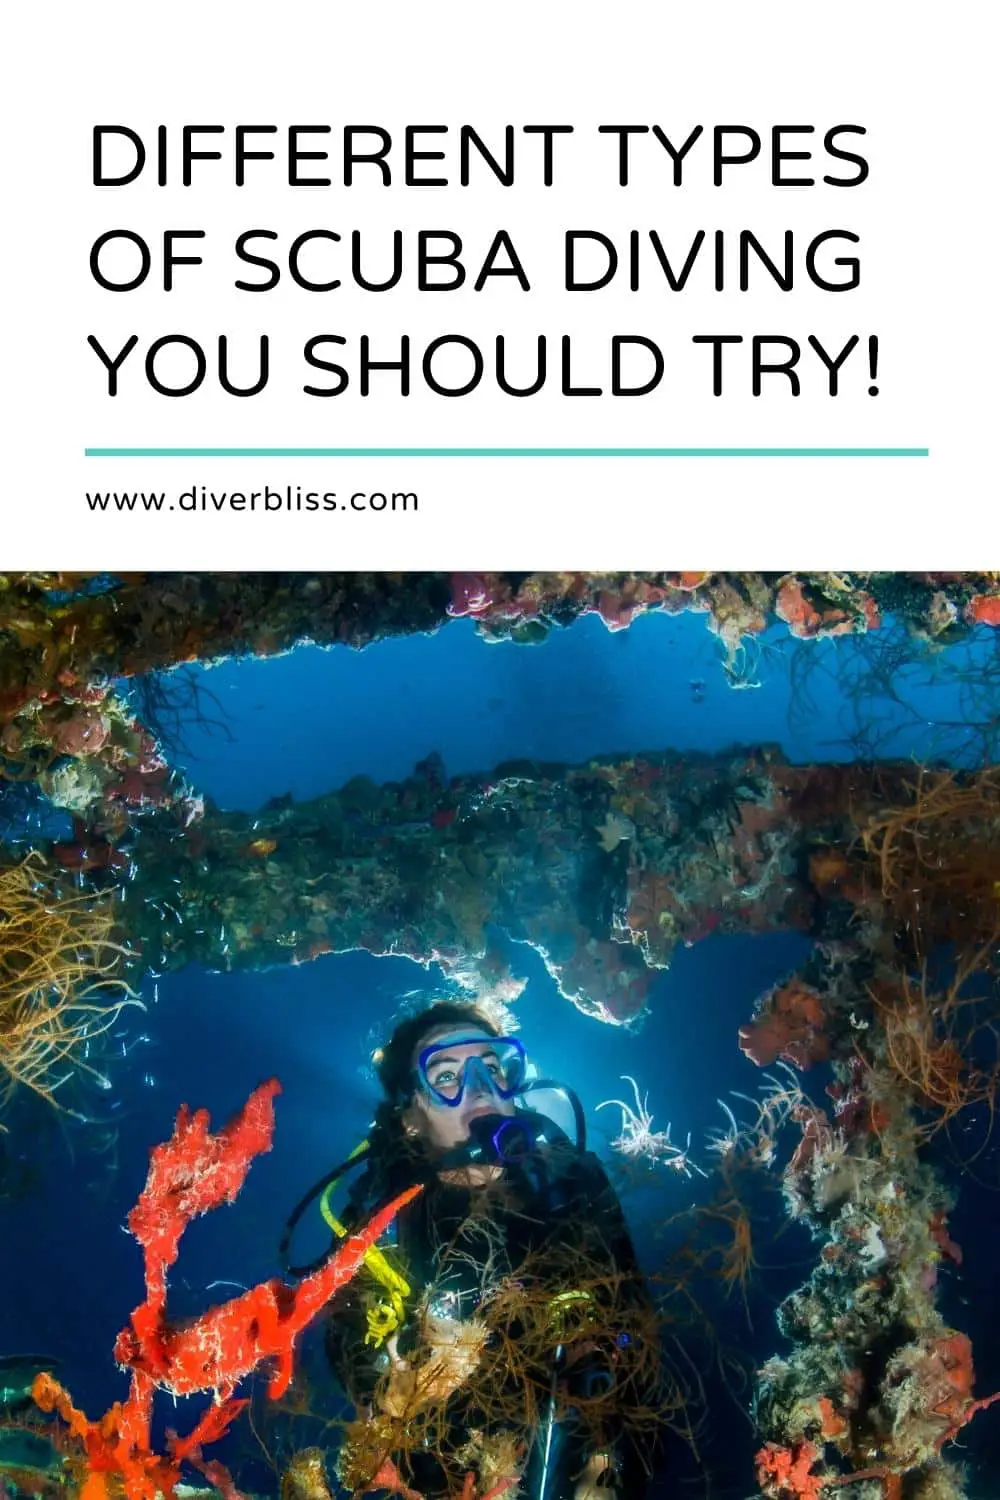 types of scuba diving